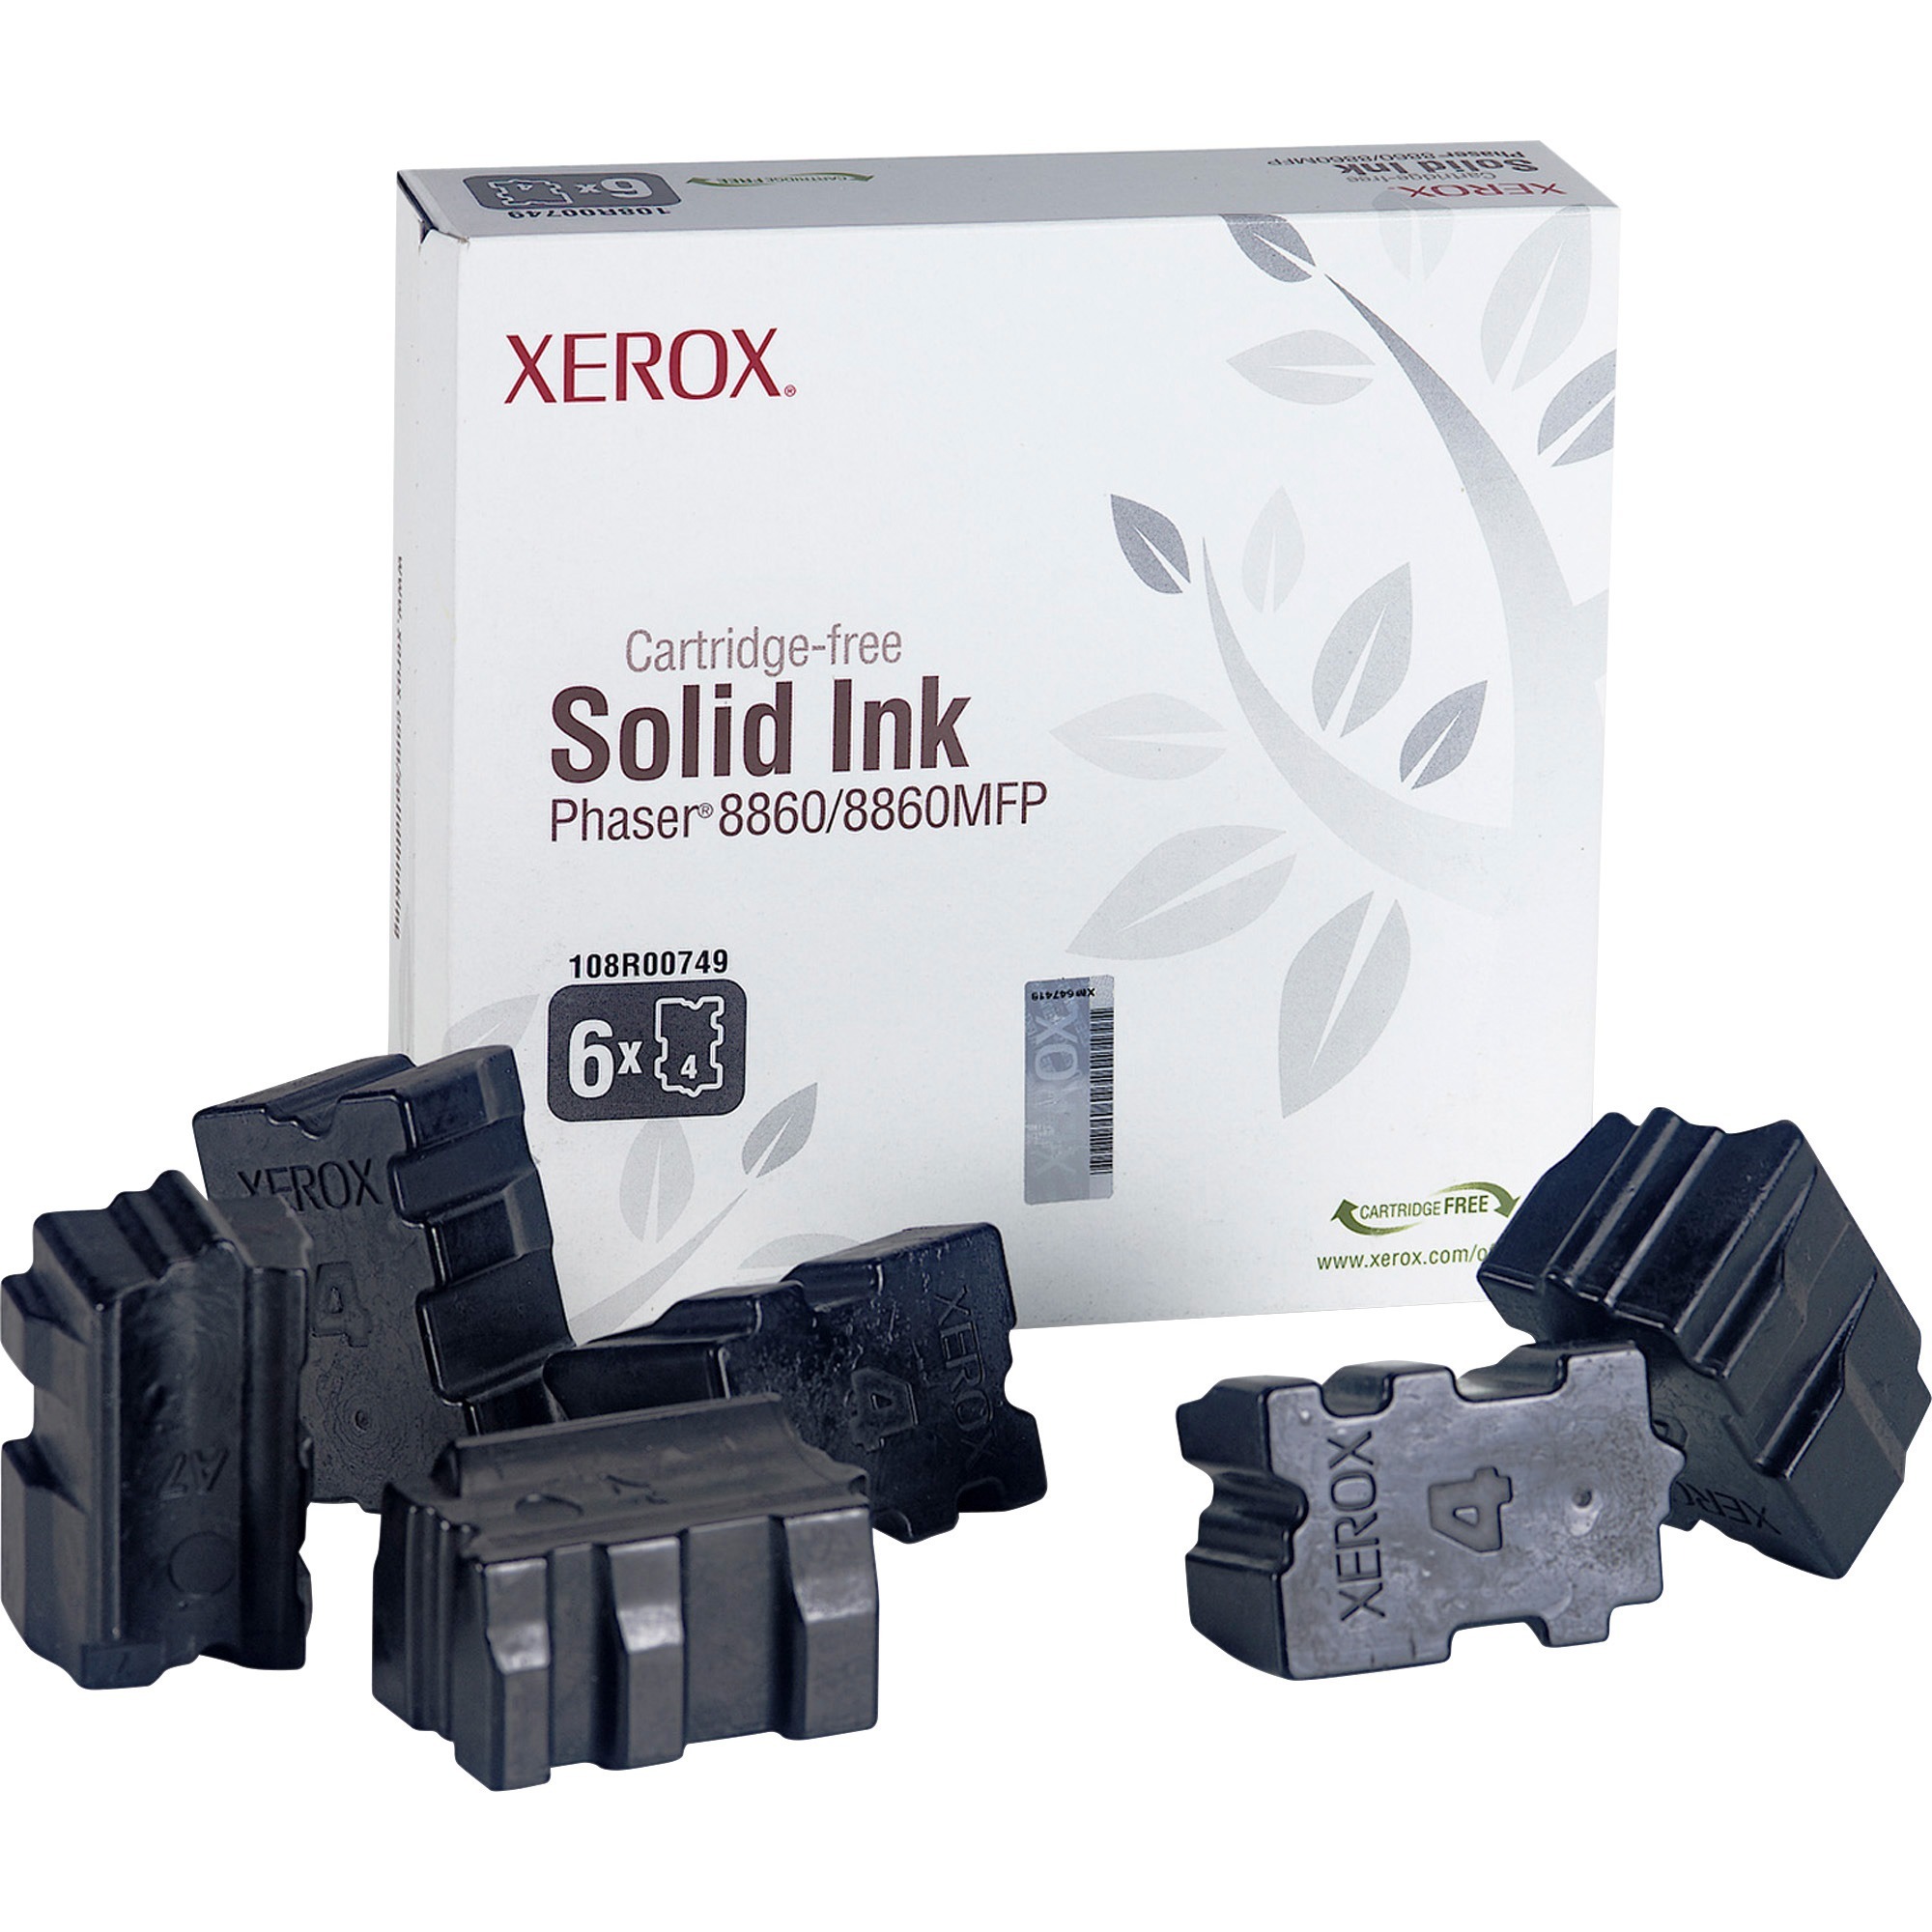 xerox-solid-ink-stick-xer108r00749